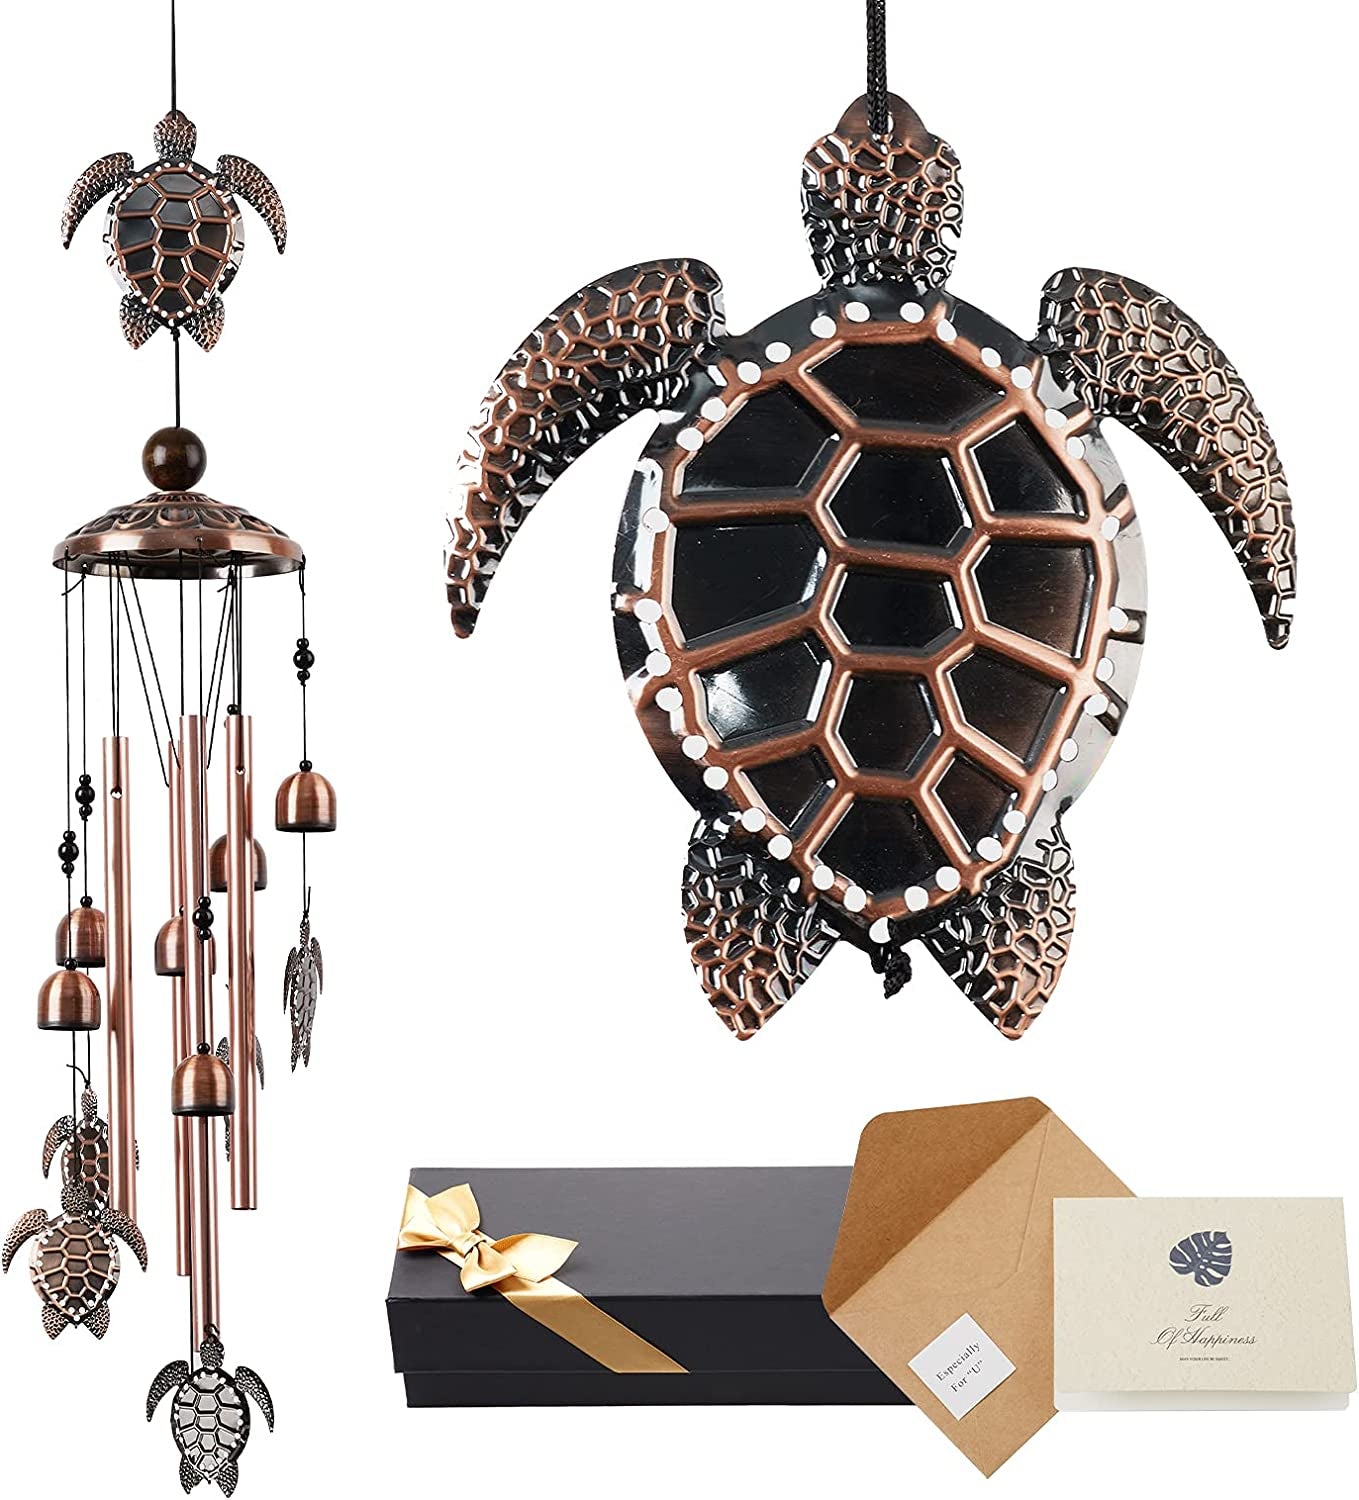 Floridliving, Floridliving Turtle Wind Chimes with Clear Sound，Memorial Wind Chimes for Outside, Extra Large Wind Chimes with Greeting Card，Tortoise Wind Bell for Garden Decoration with Message Card&Gift Box… (Gift Box)